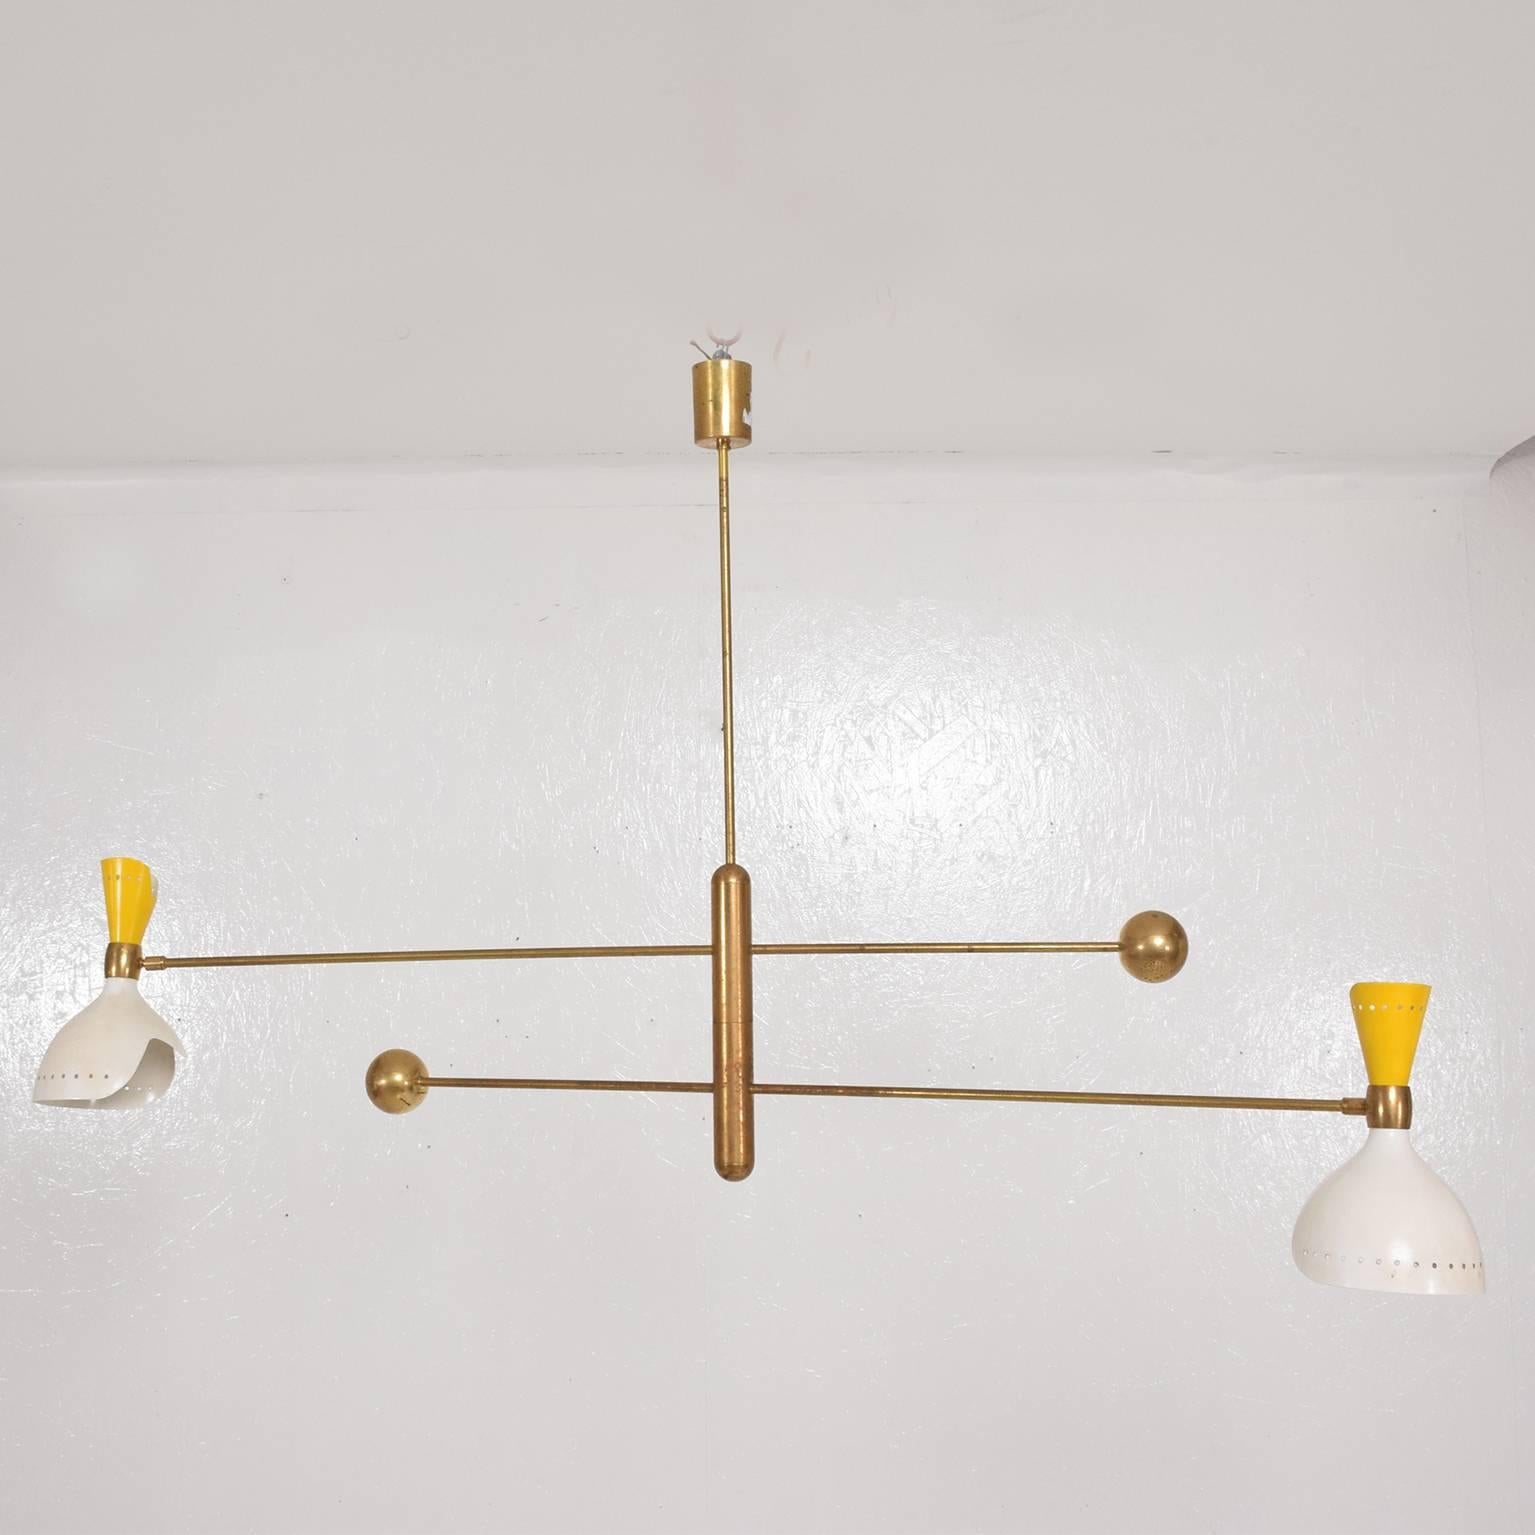 For your consideration a vintage chandelier in the style of Stilnovo. Beautiful mobile sculptural configuration.
Brass body with double shades in yellow and off white color.
Arms are fully adjustable.
Dimensions: 32